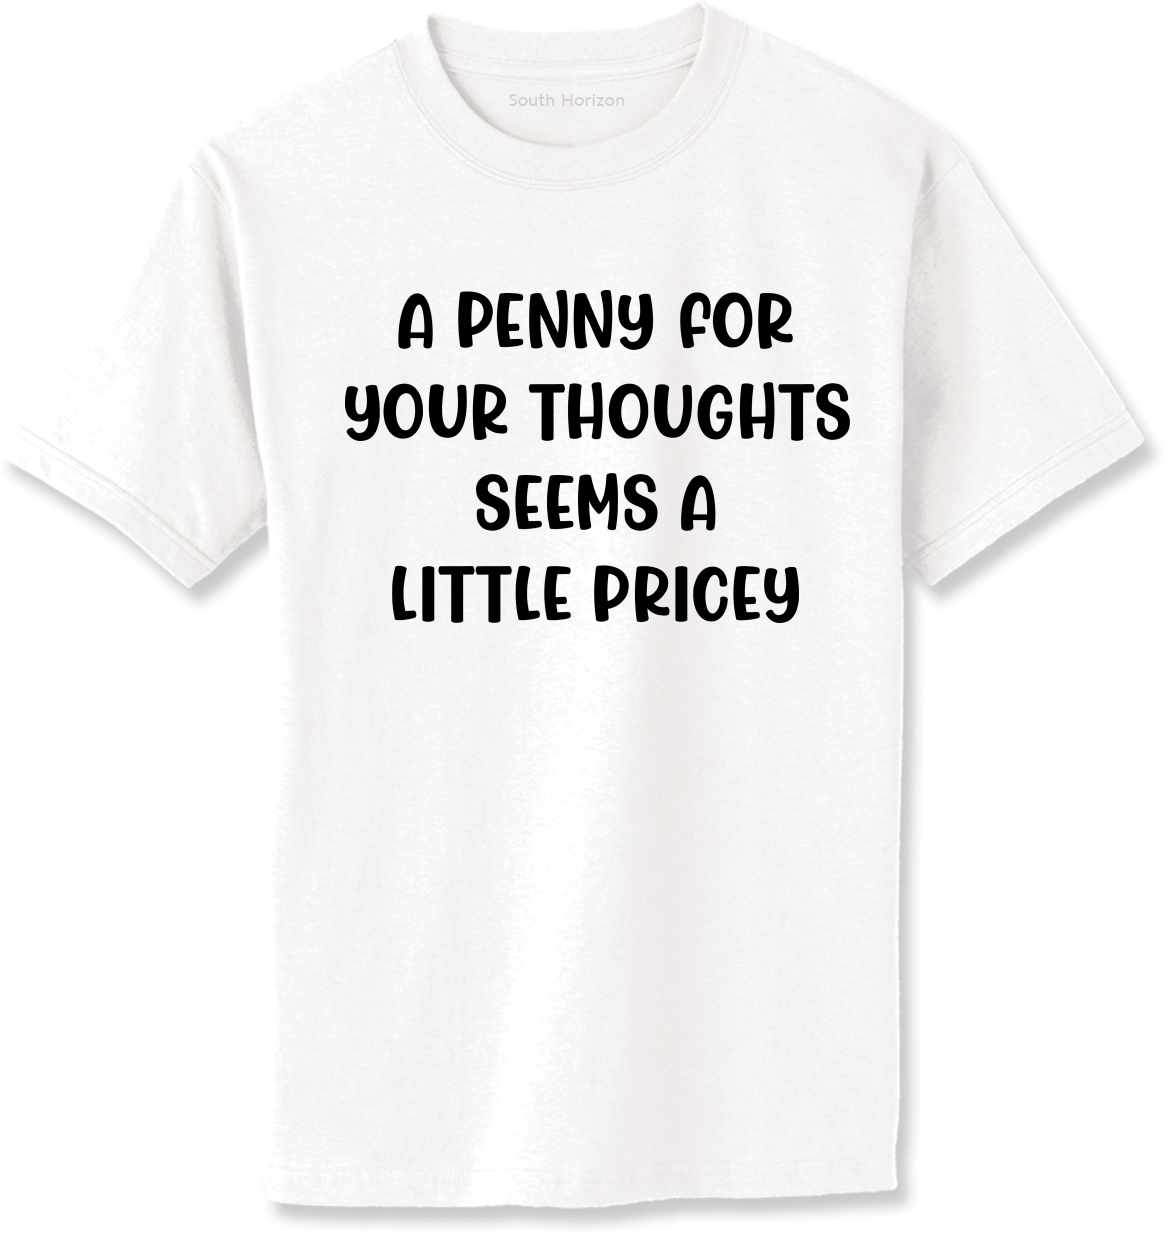 A Penny For Your Thoughts on Adult T-Shirt